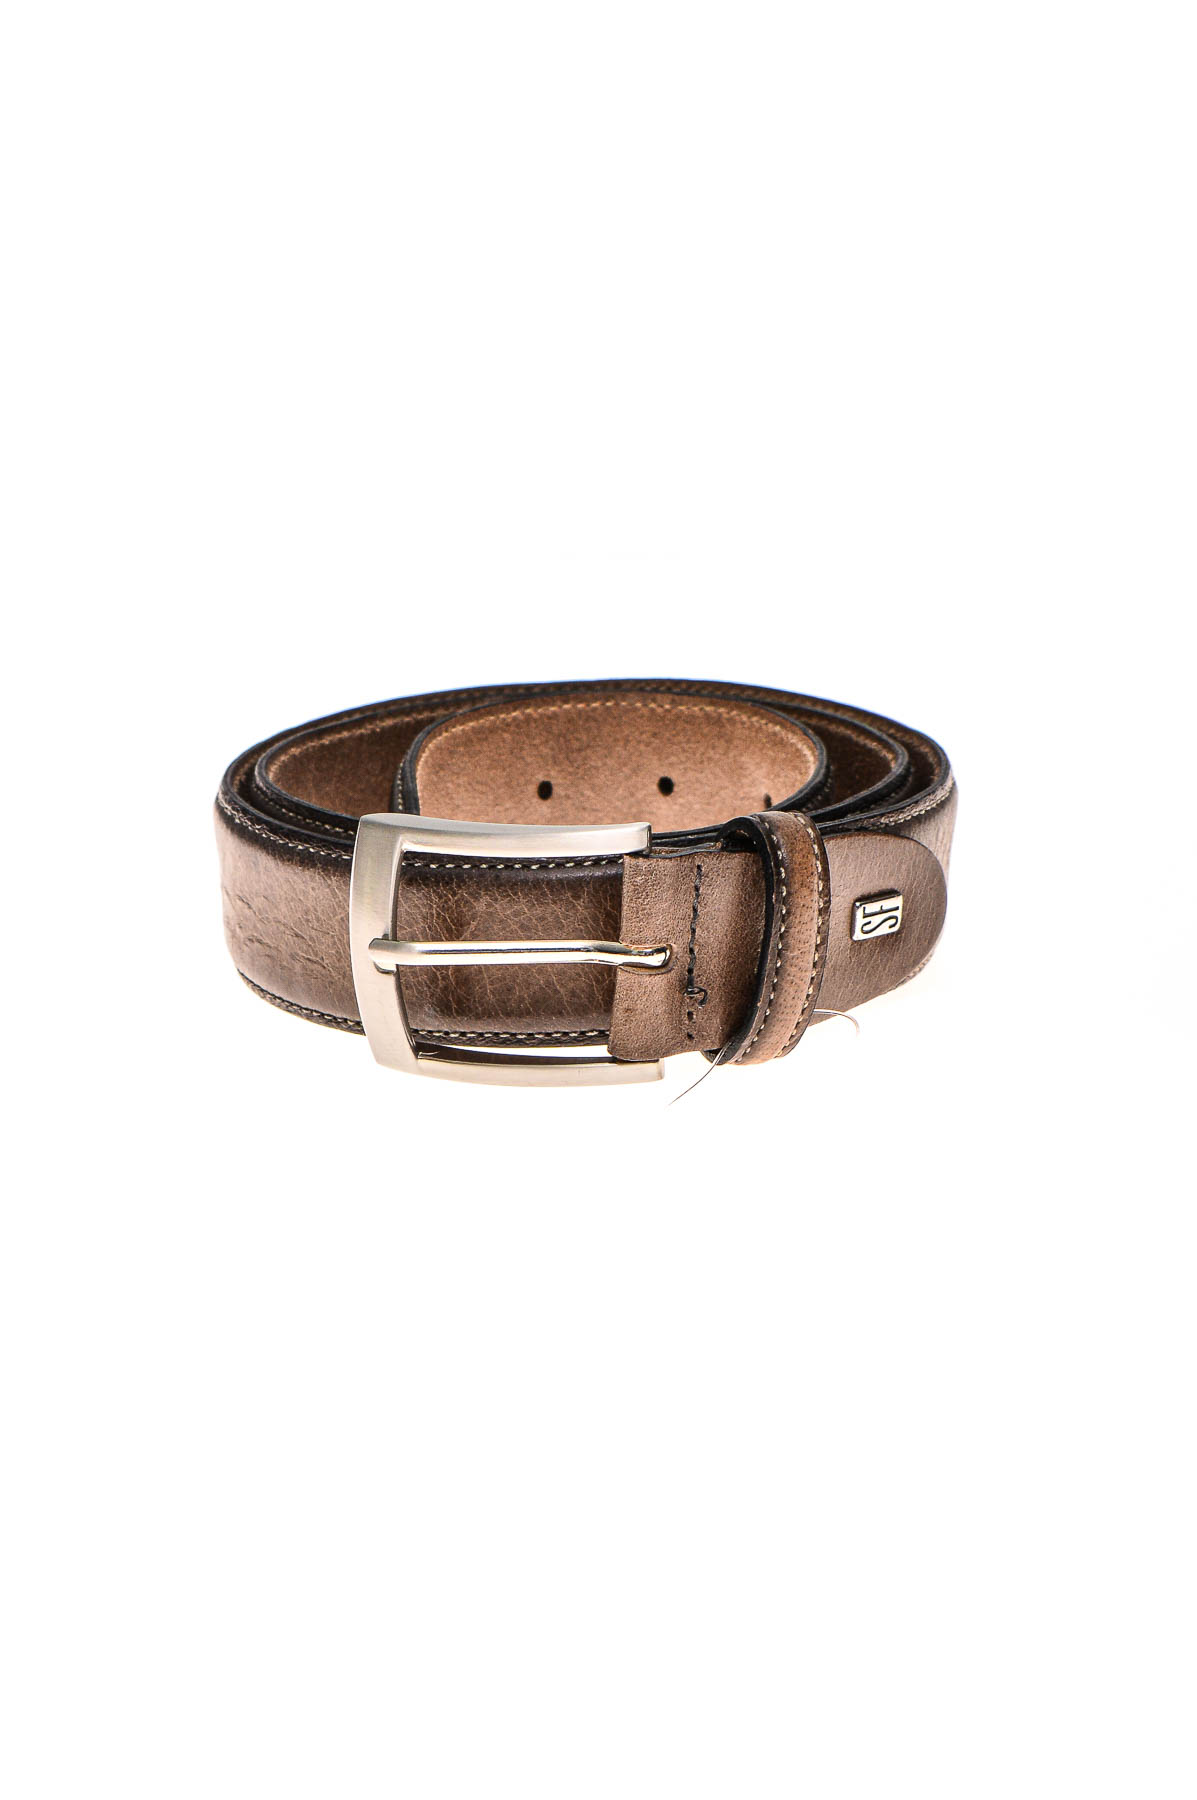 Men's belt - SF Passion for Leather - 0